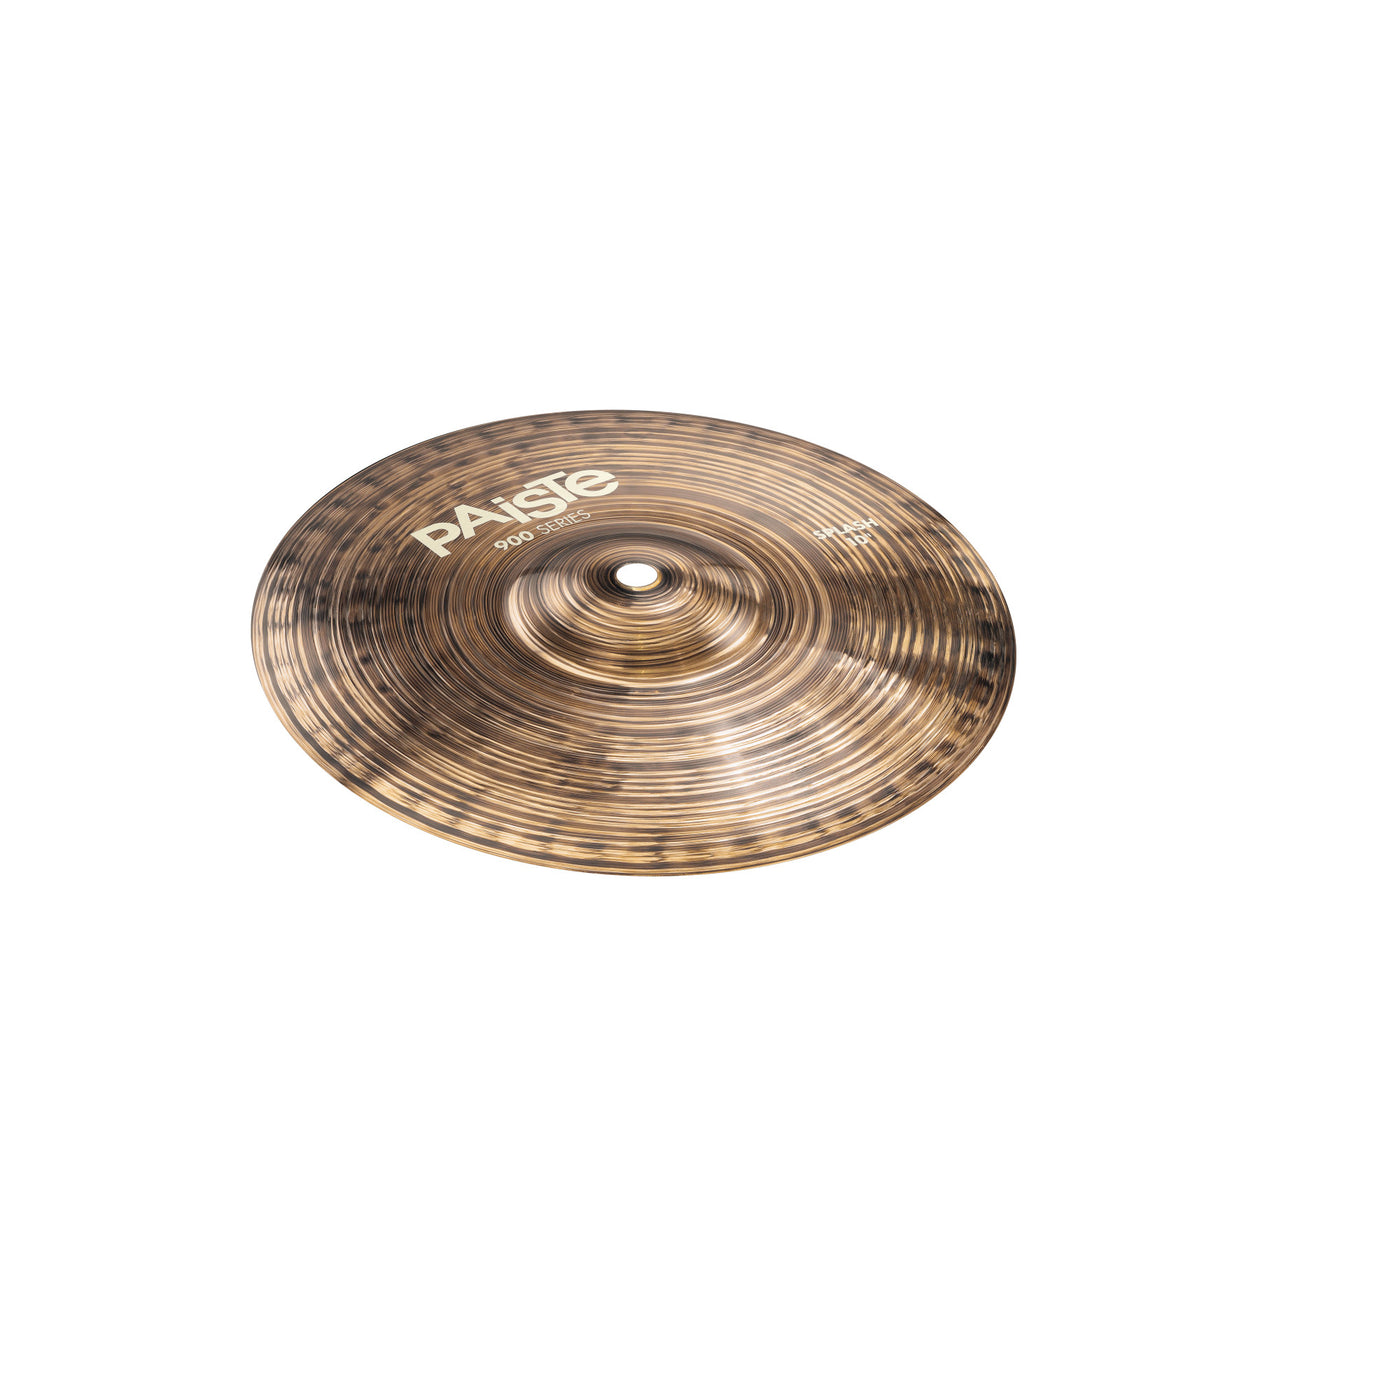 Paiste Splash Cymbal, 900 Series, Percussion Instrument for Drums, 10"